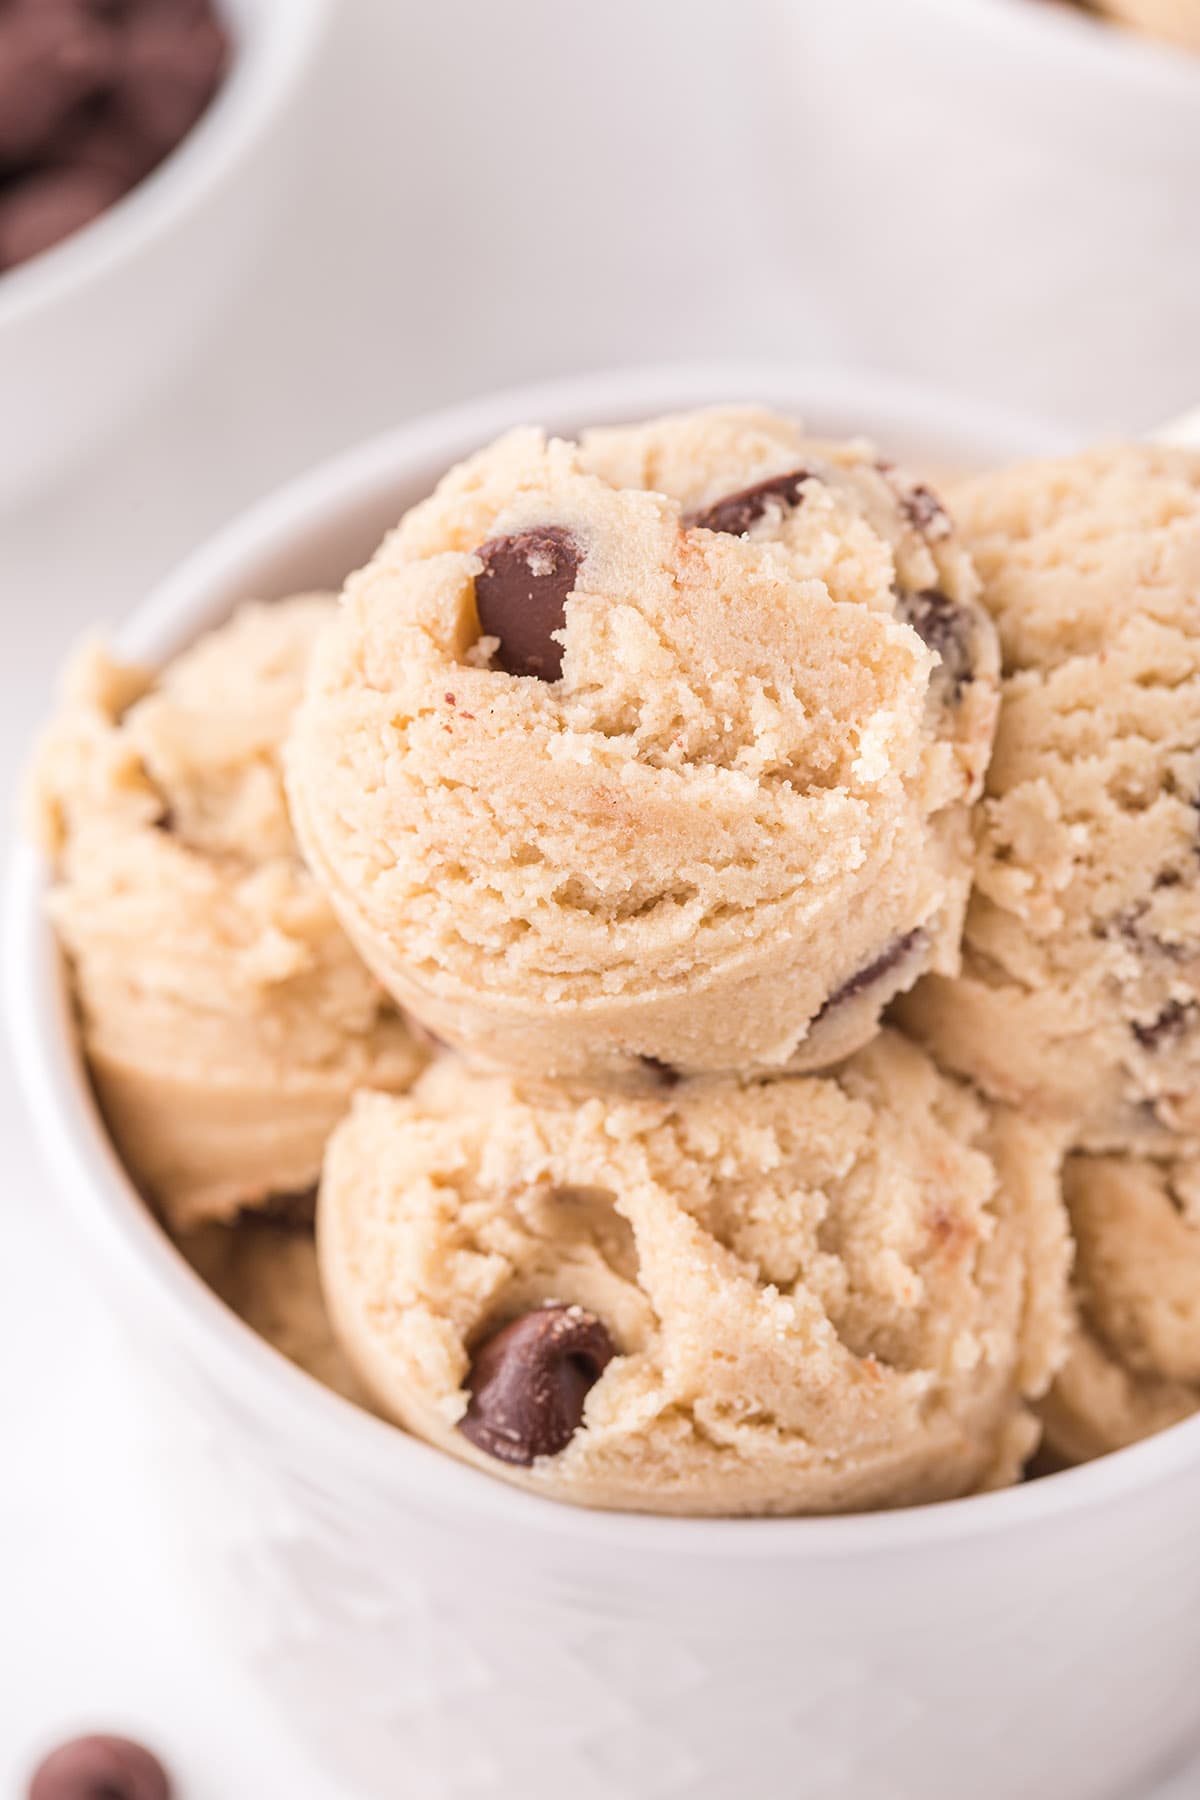 edible cookie dough with chocolate chips